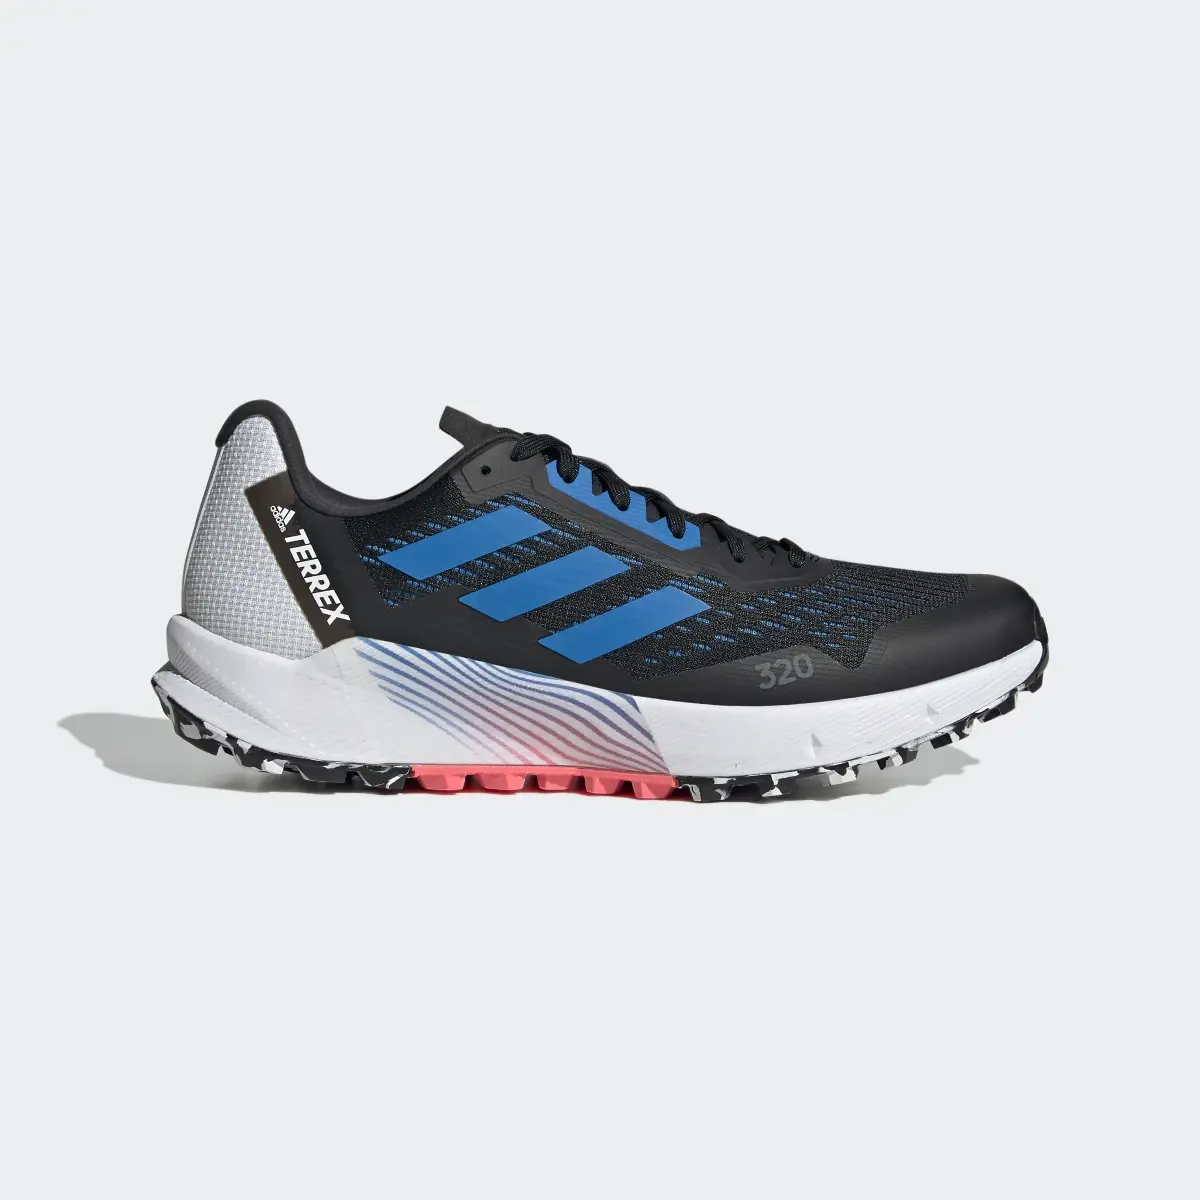 Adidas TERREX AGRAVIC FLOW 2 TRAIL RUNNING SHOES. 2